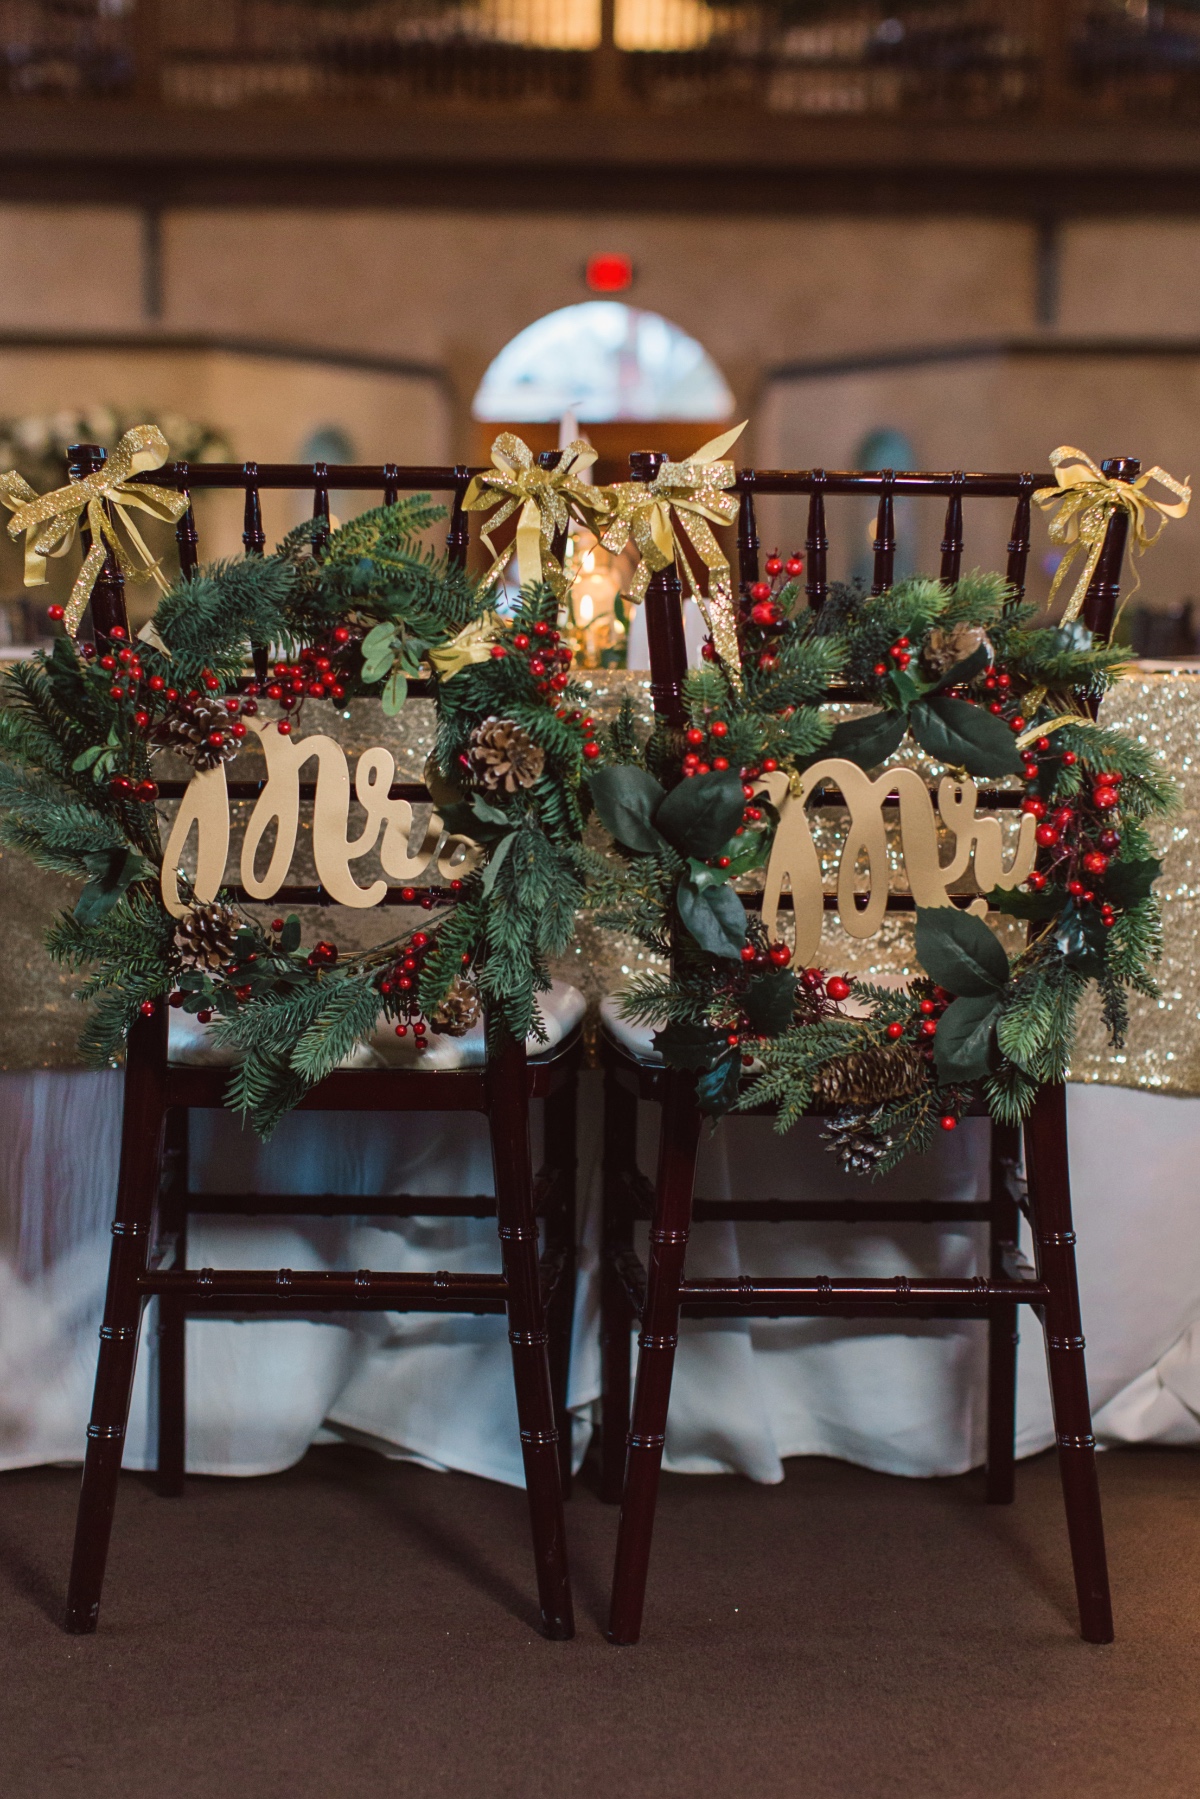 Mr. and Mrs. chair wreaths